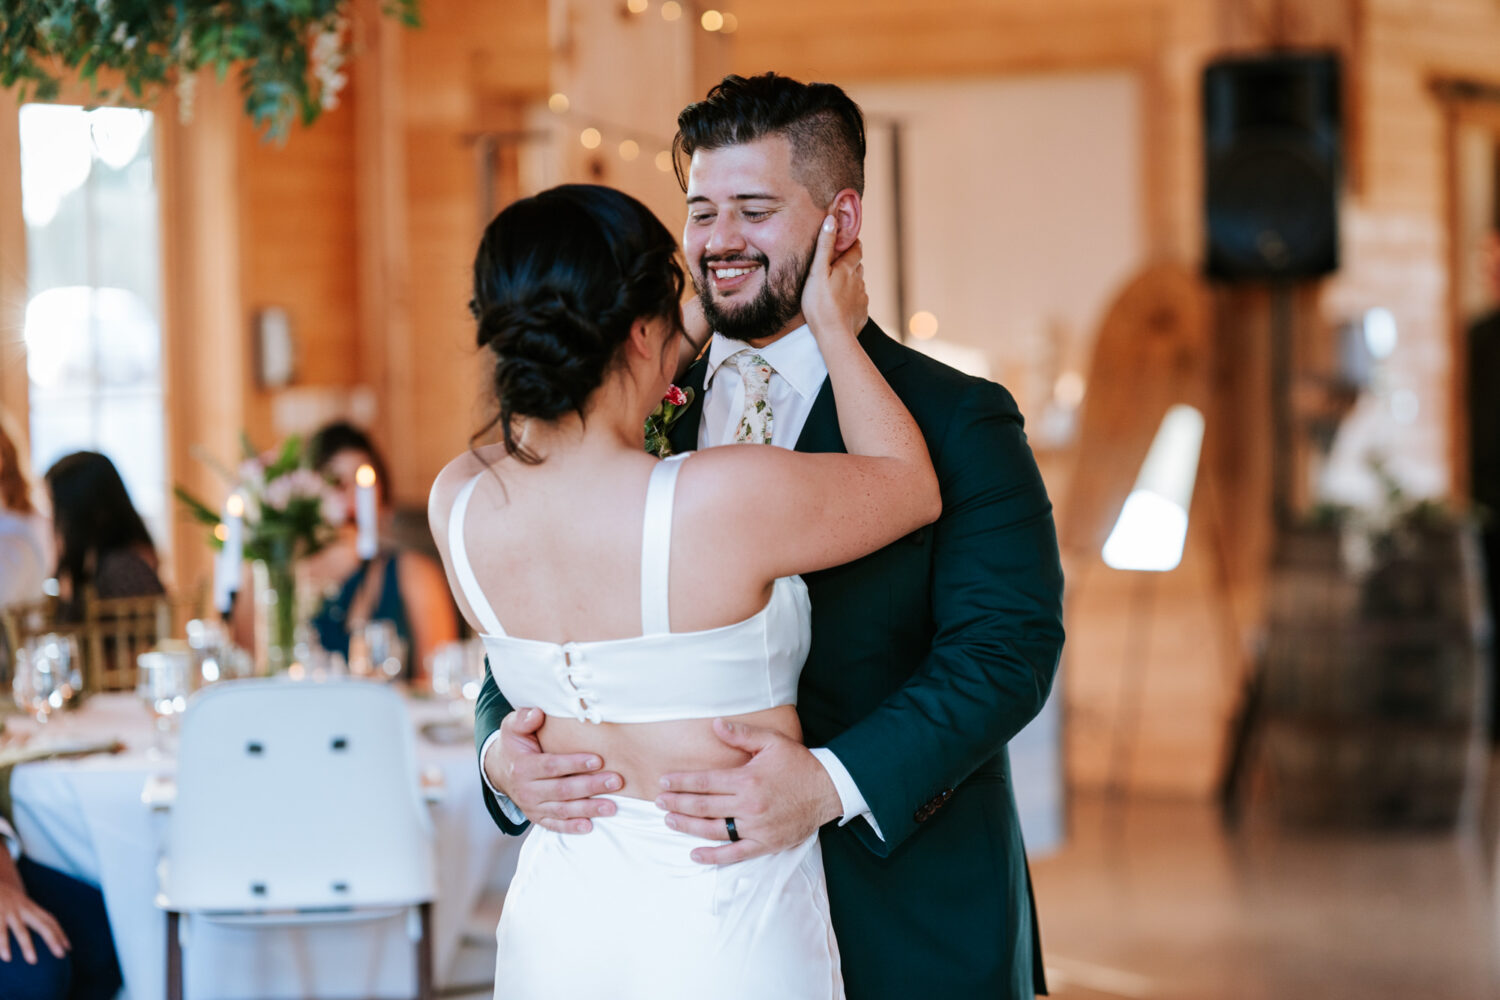 bride and groom sharing their first dance as a married couple